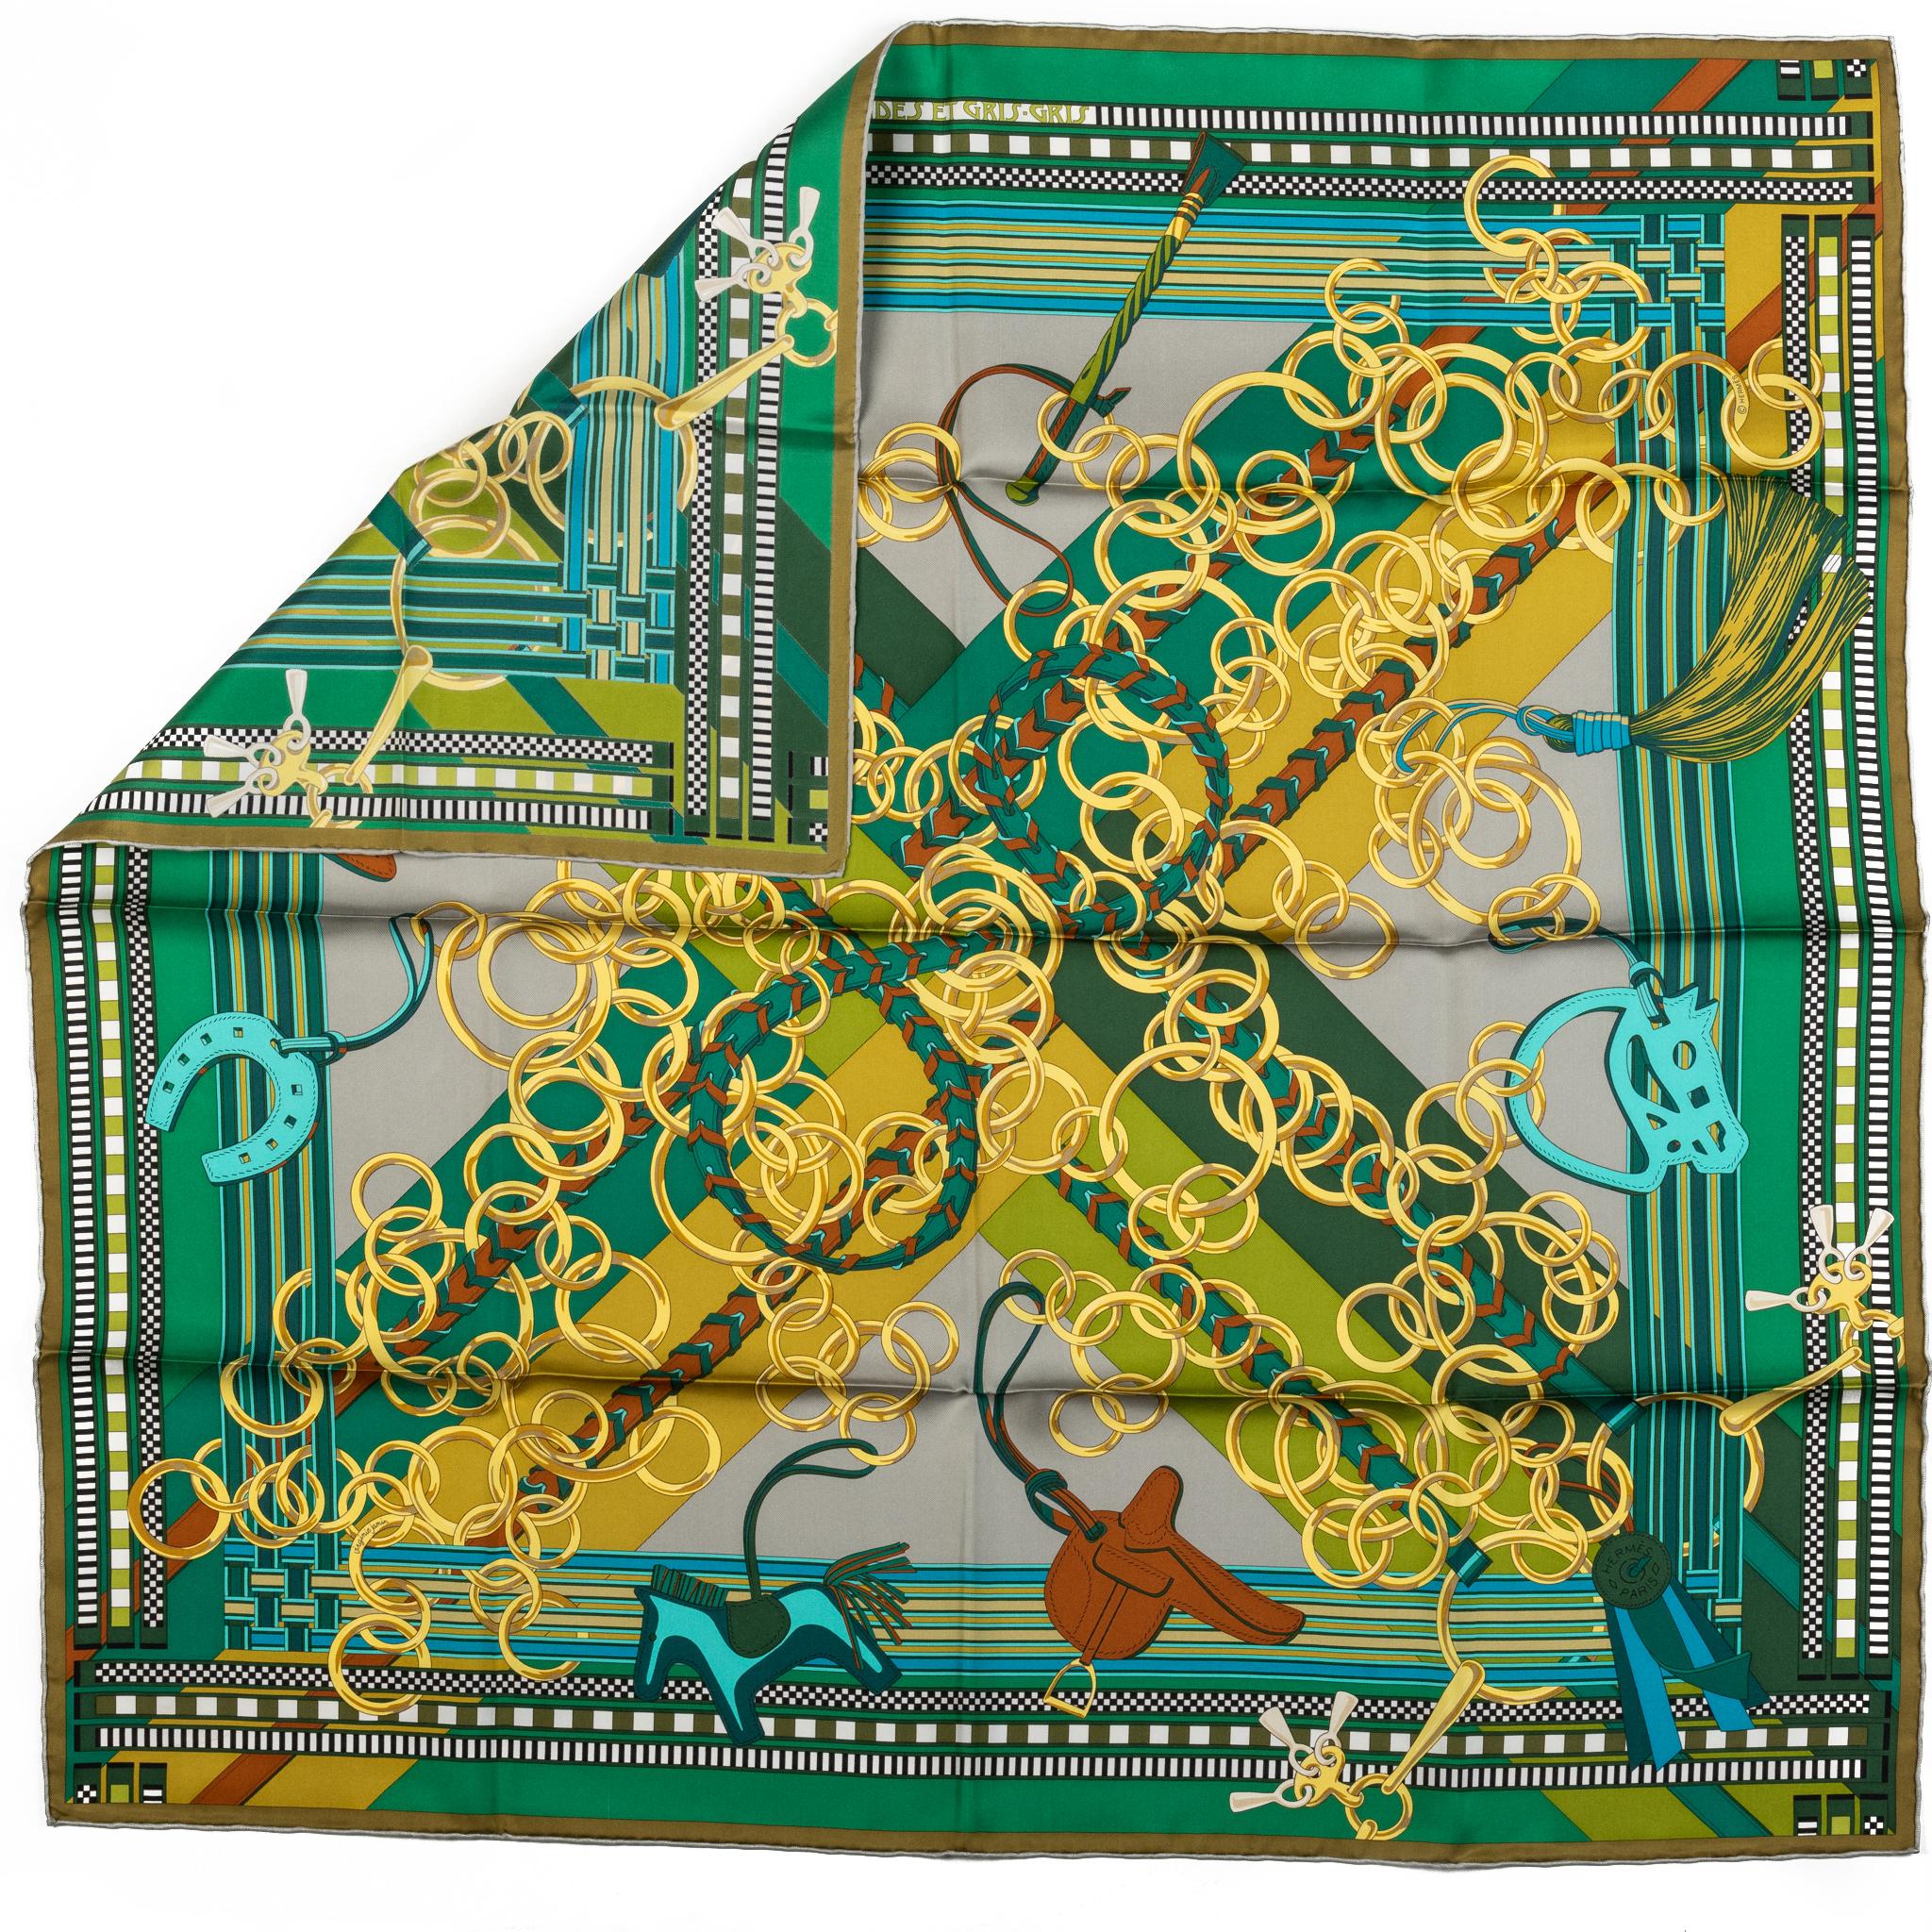 Hermes collectible bag charms silk scarf in green and yellow. Hand rolled edges. No box included.